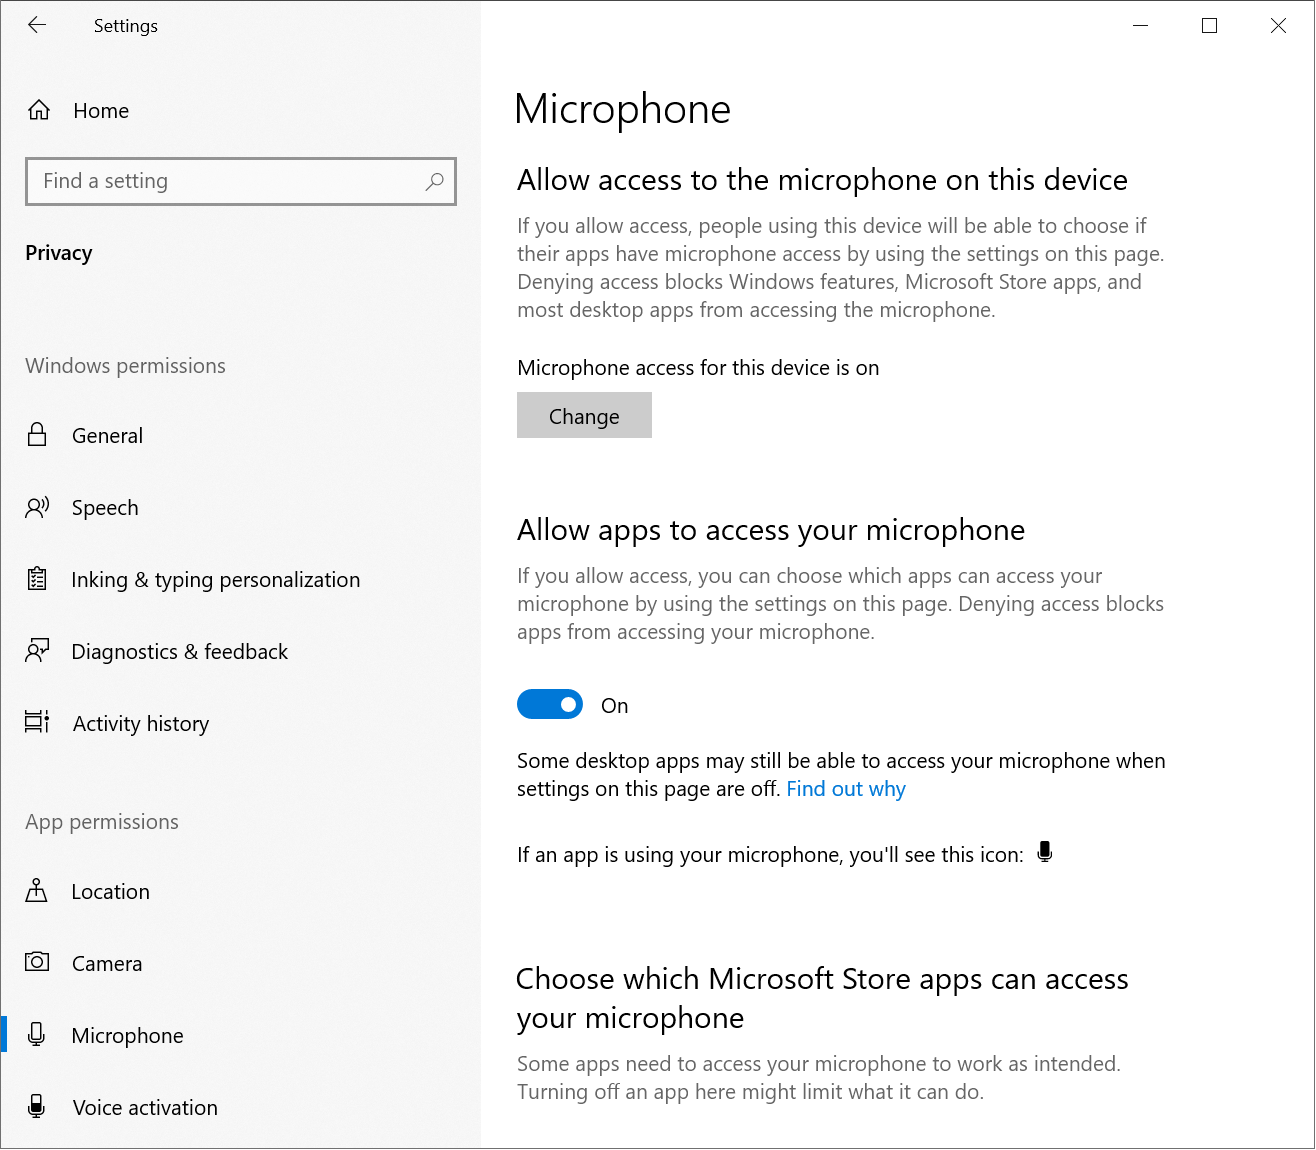 Settings > Privacy > App permissions > Microphone > 'Allow apps to access your microphone' On